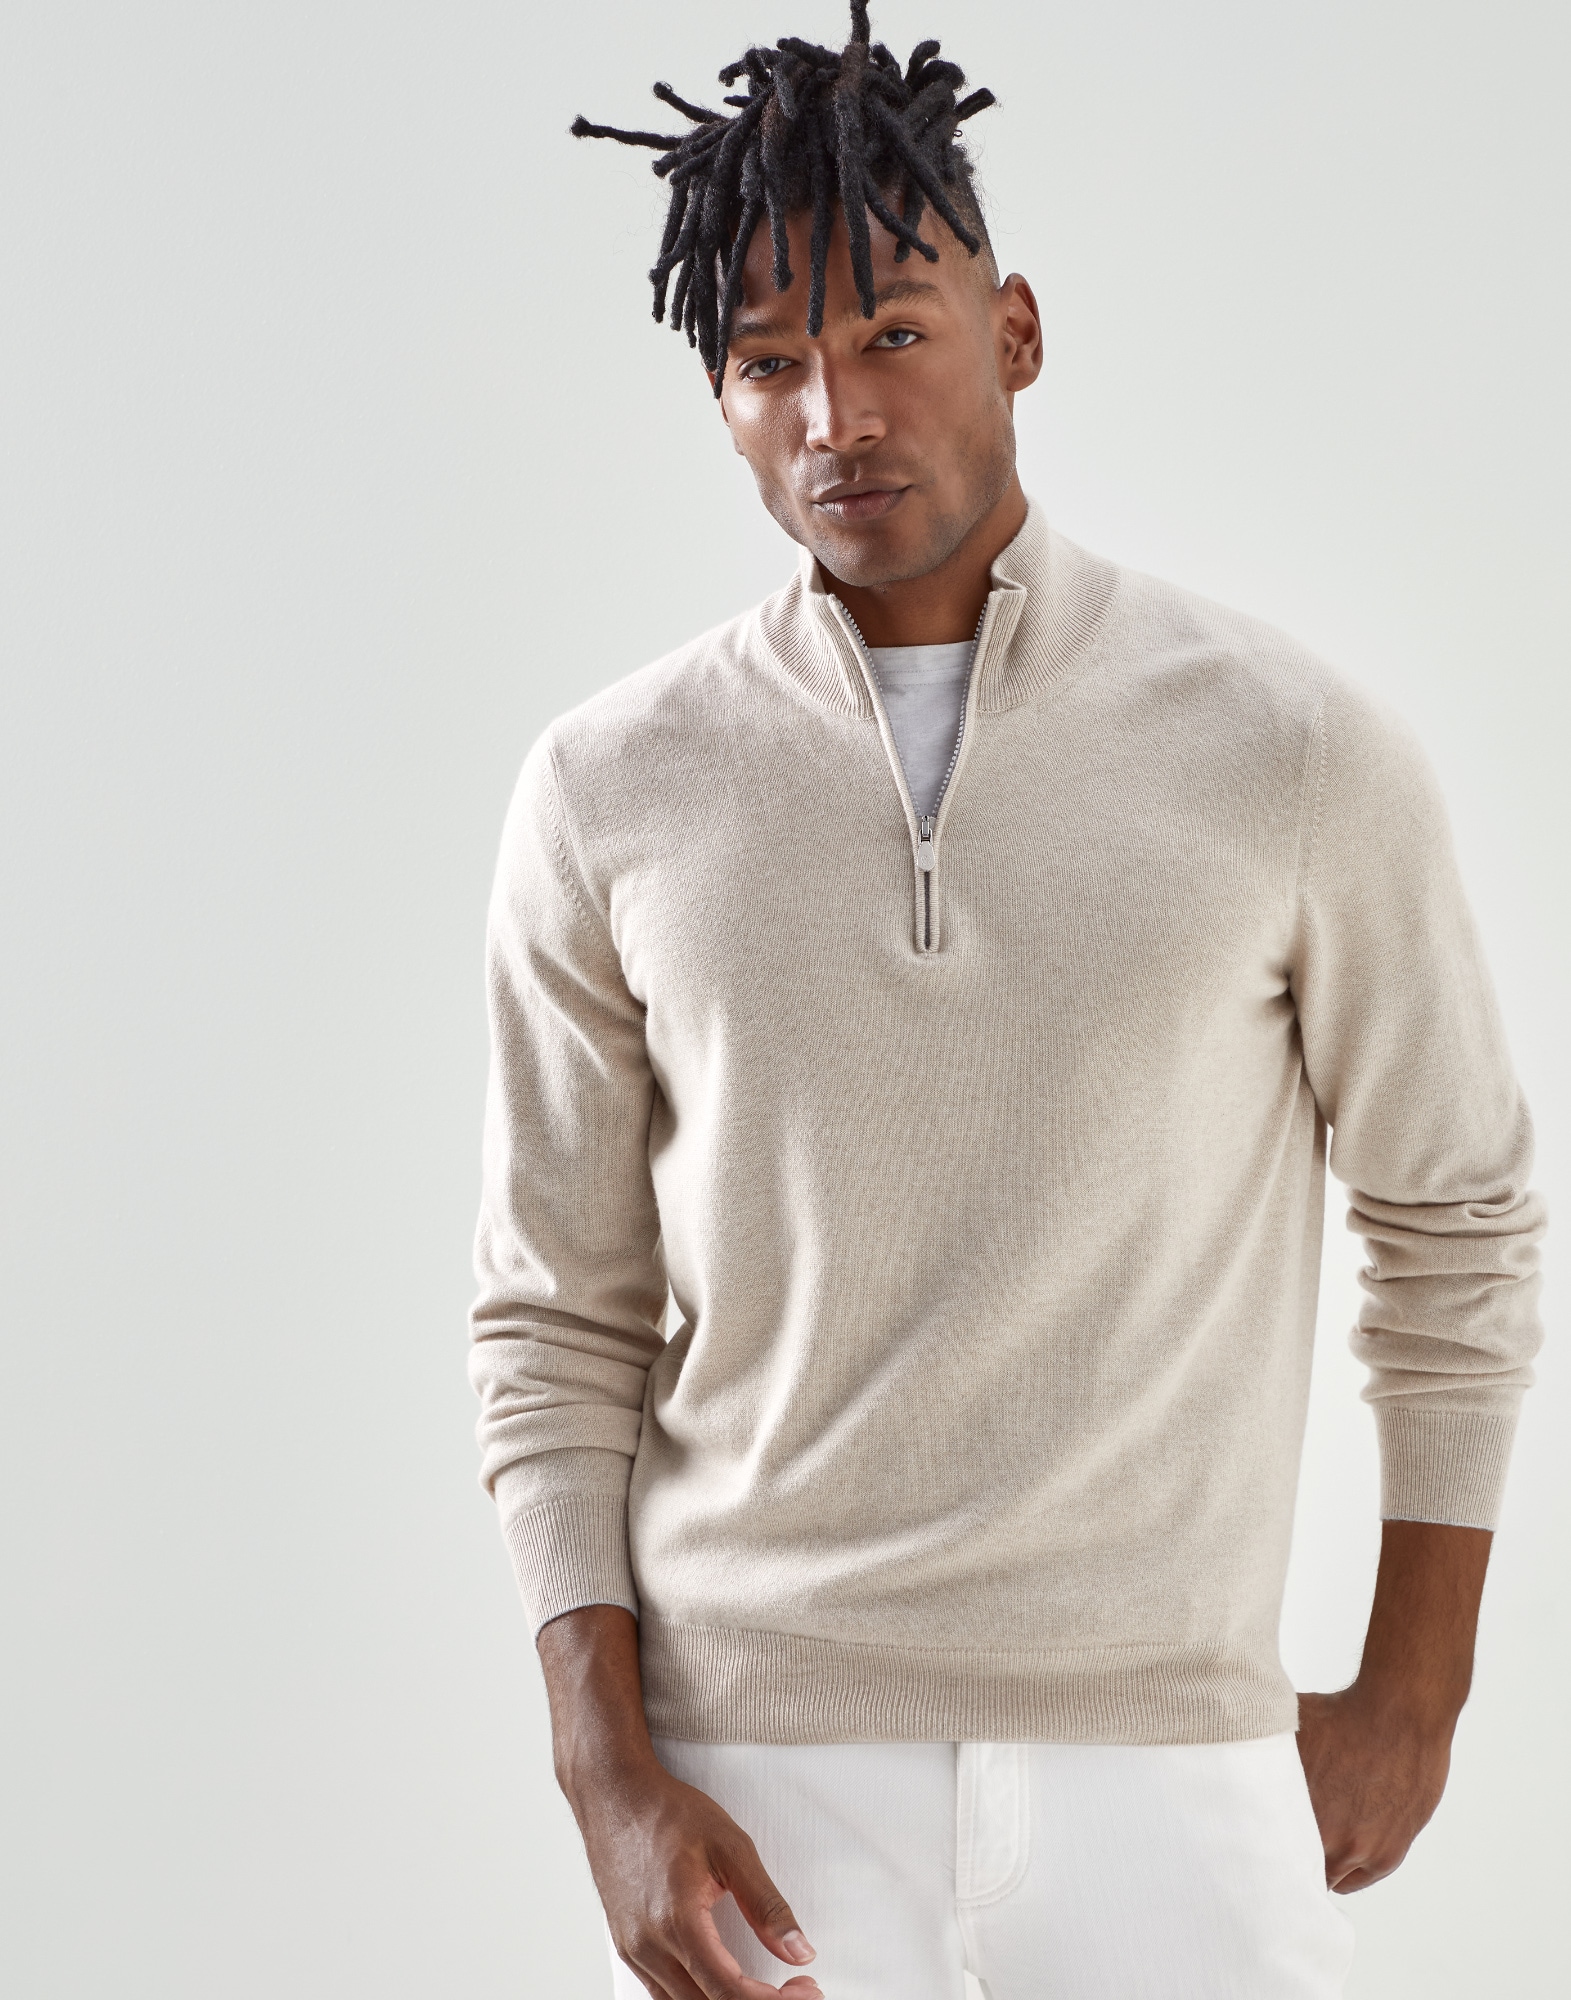 for Men Grey Mens Sweaters and knitwear Brunello Cucinelli Sweaters and knitwear Save 17% Brunello Cucinelli Cashmere Zip Cardigan in Grey 